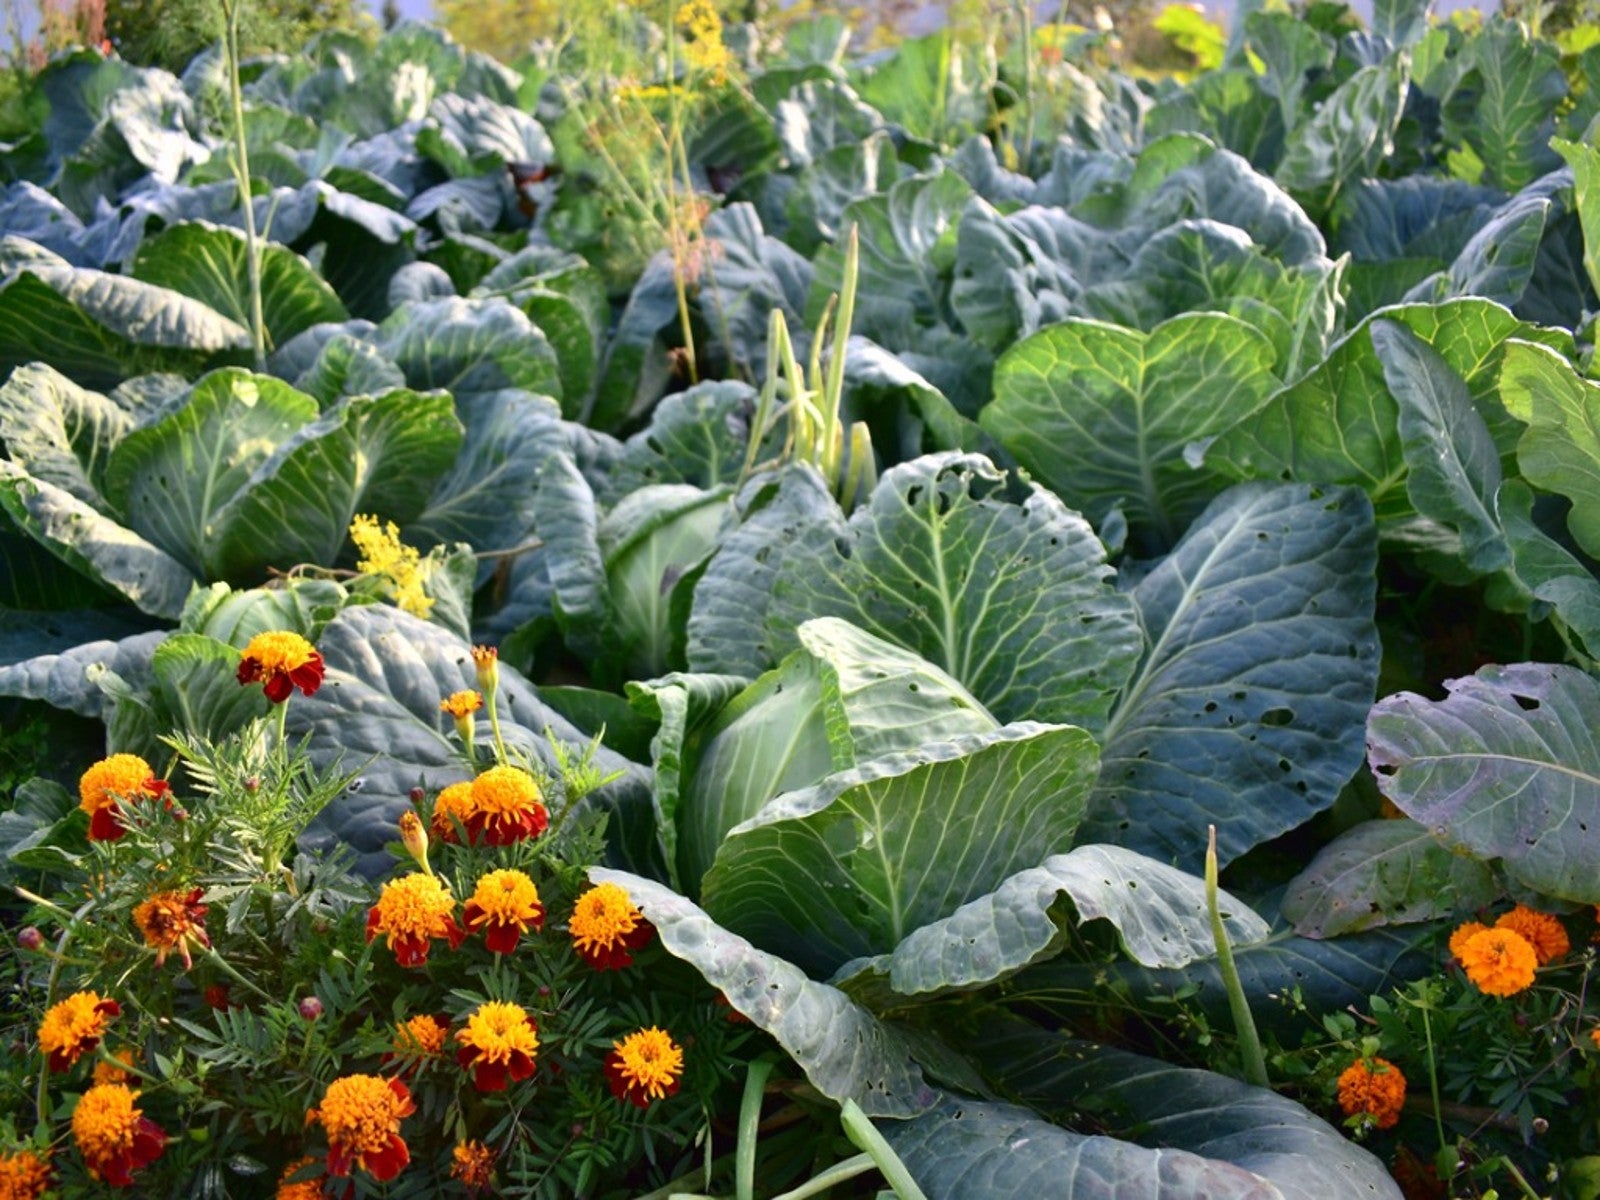 Image of Chinese cabbage and basil companion plants